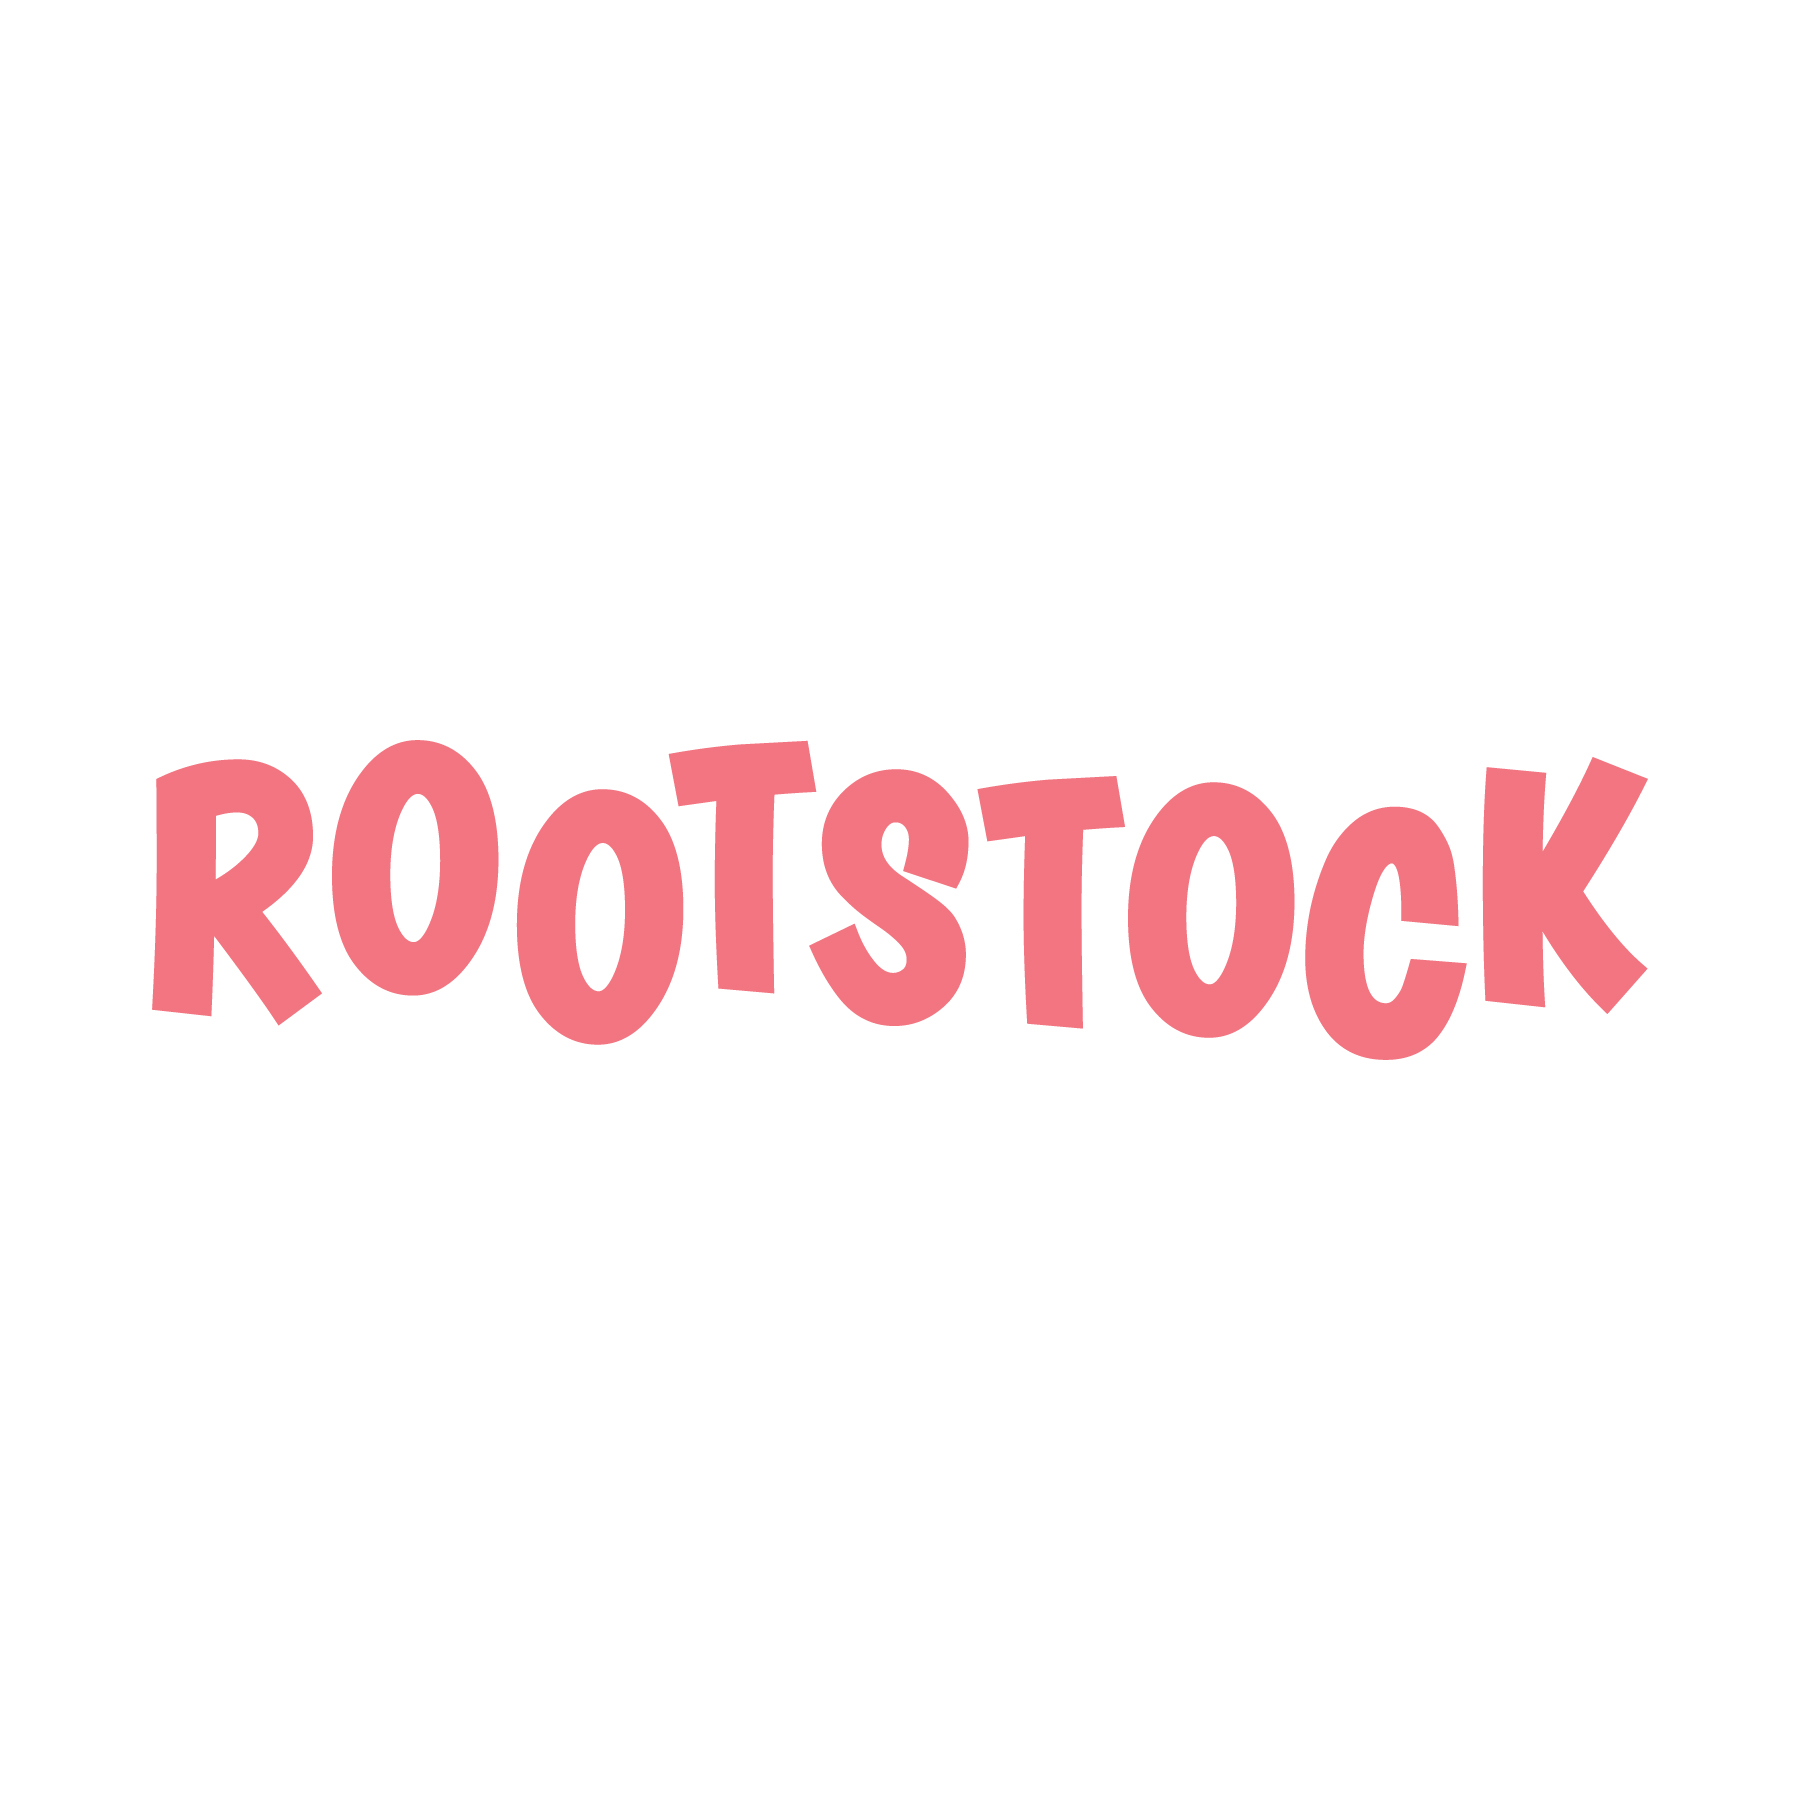 Rootstock logo design by logo designer DISCIPLE for your inspiration and for the worlds largest logo competition